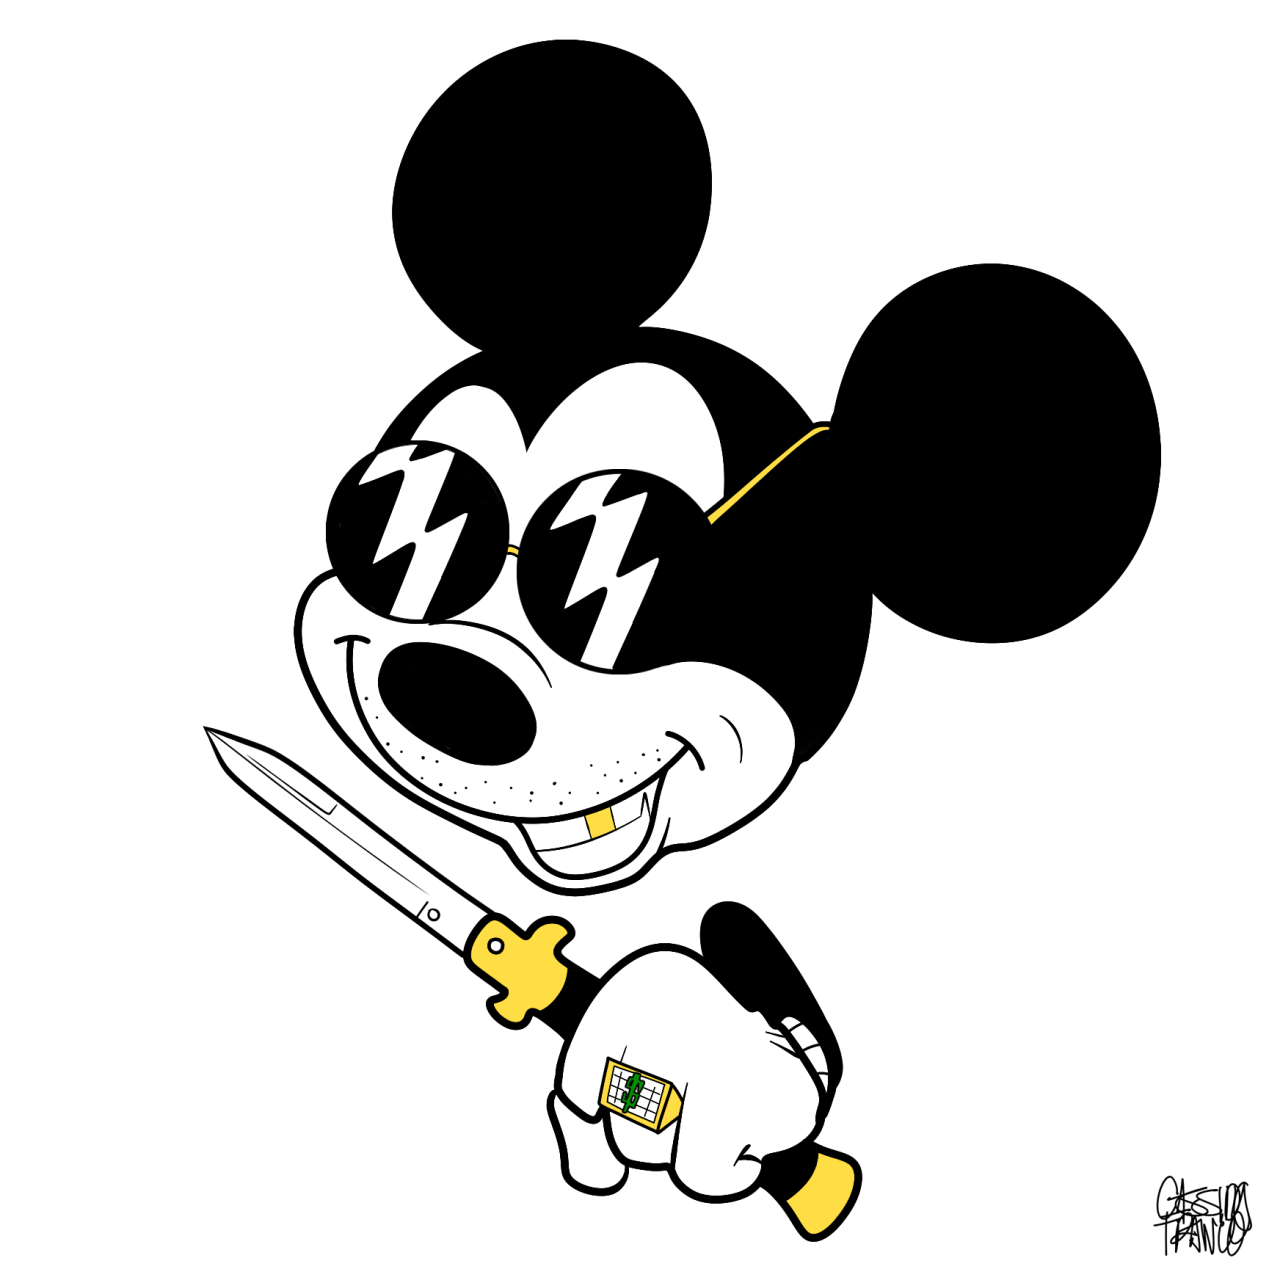 gangster mickey mouse. Mickey mouse drawings, Minnie mouse drawing, Mickey mouse wallpaper